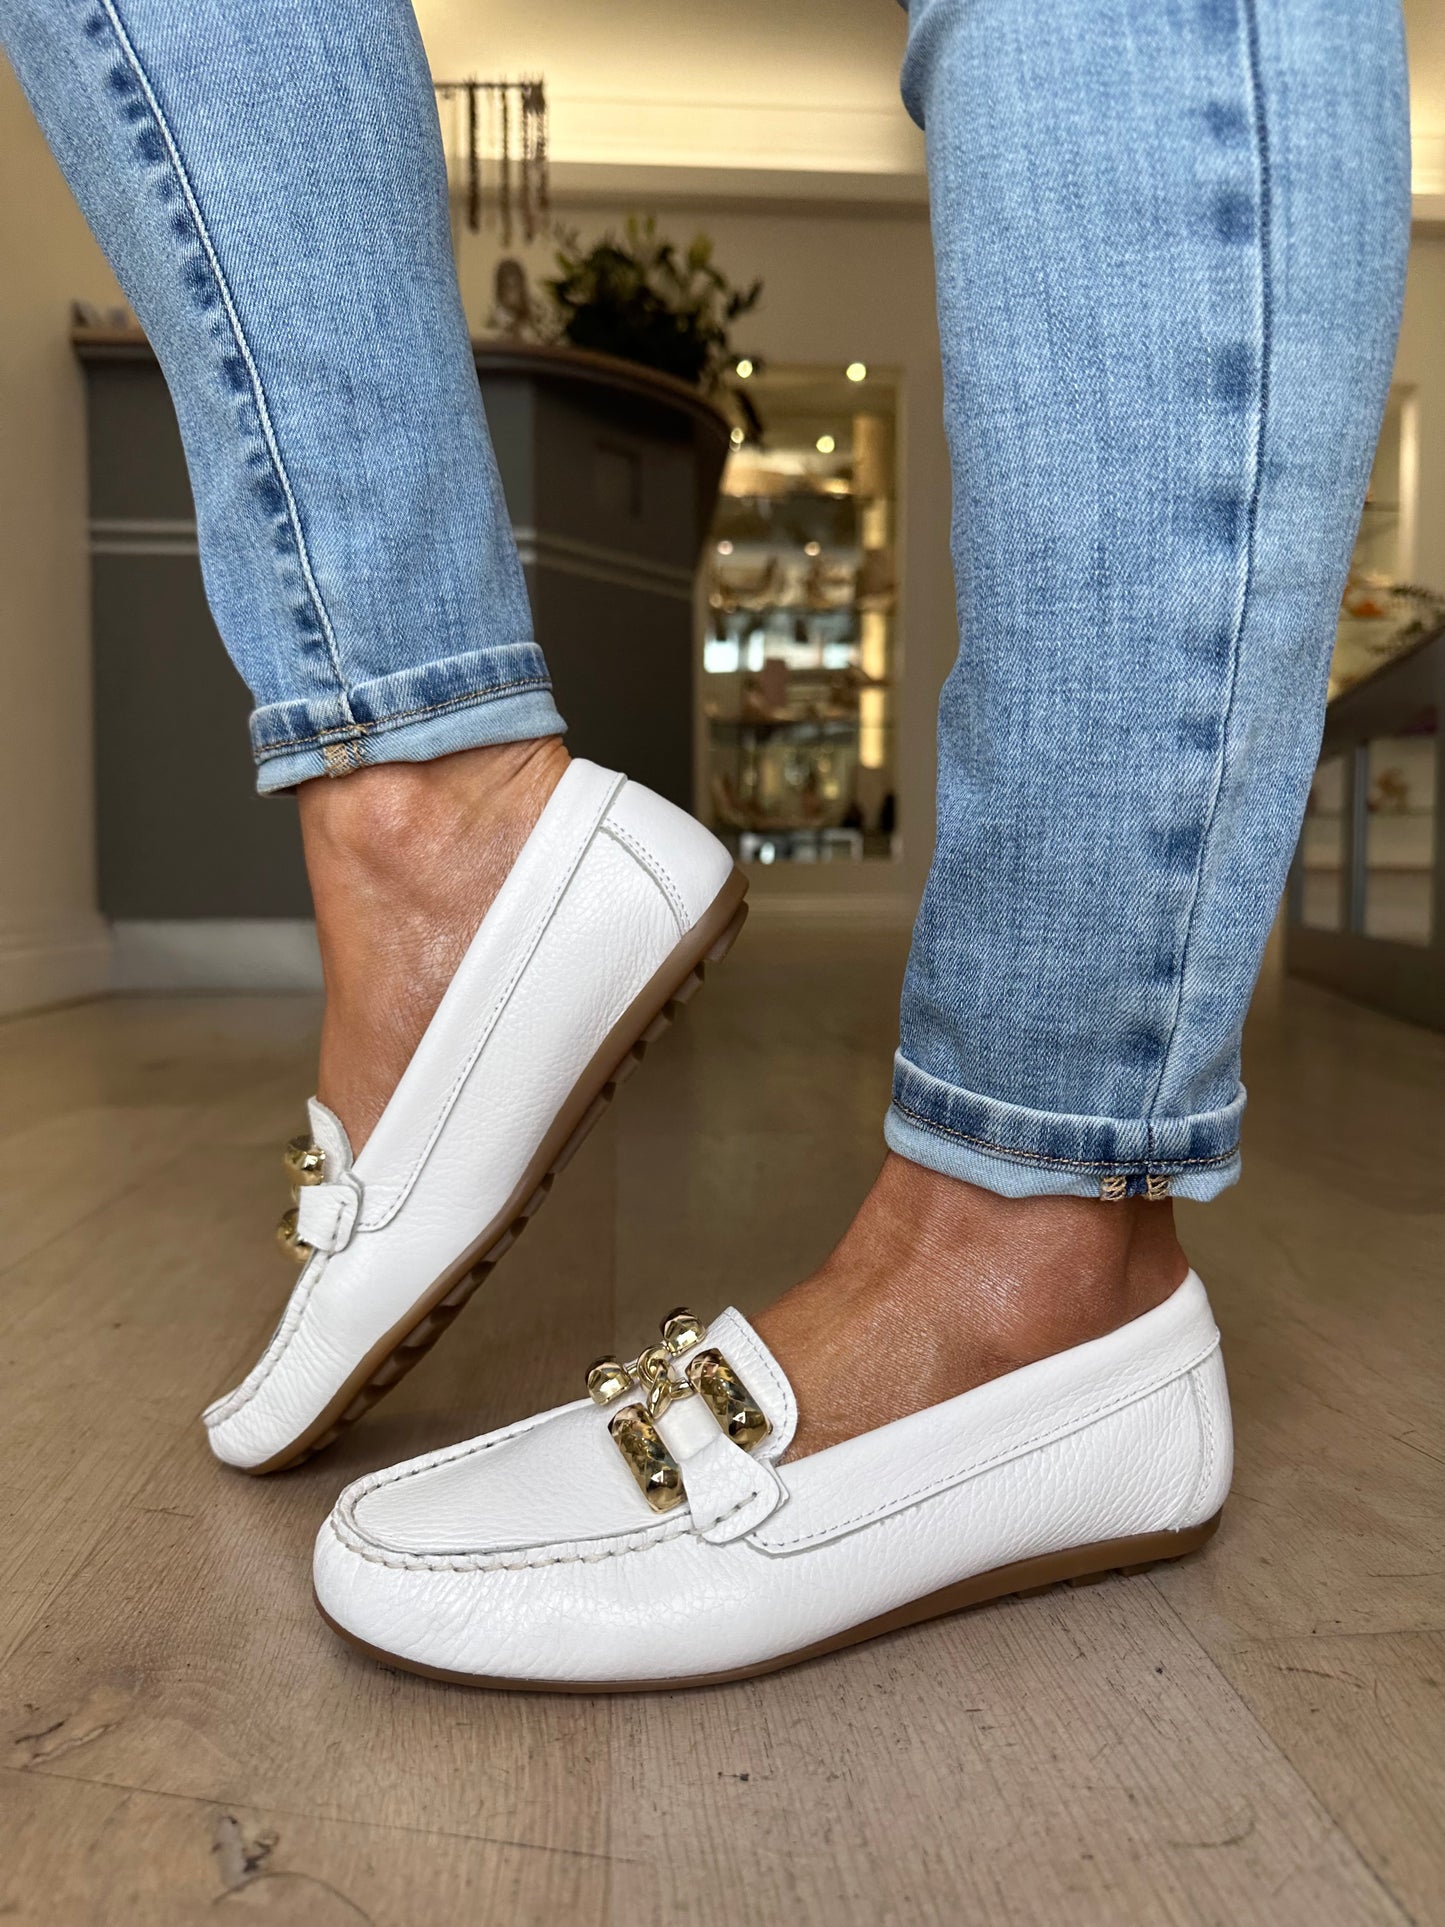 Dchicas (By Viguera) - White Soft Leather Loafer With Chunky Gold Trim